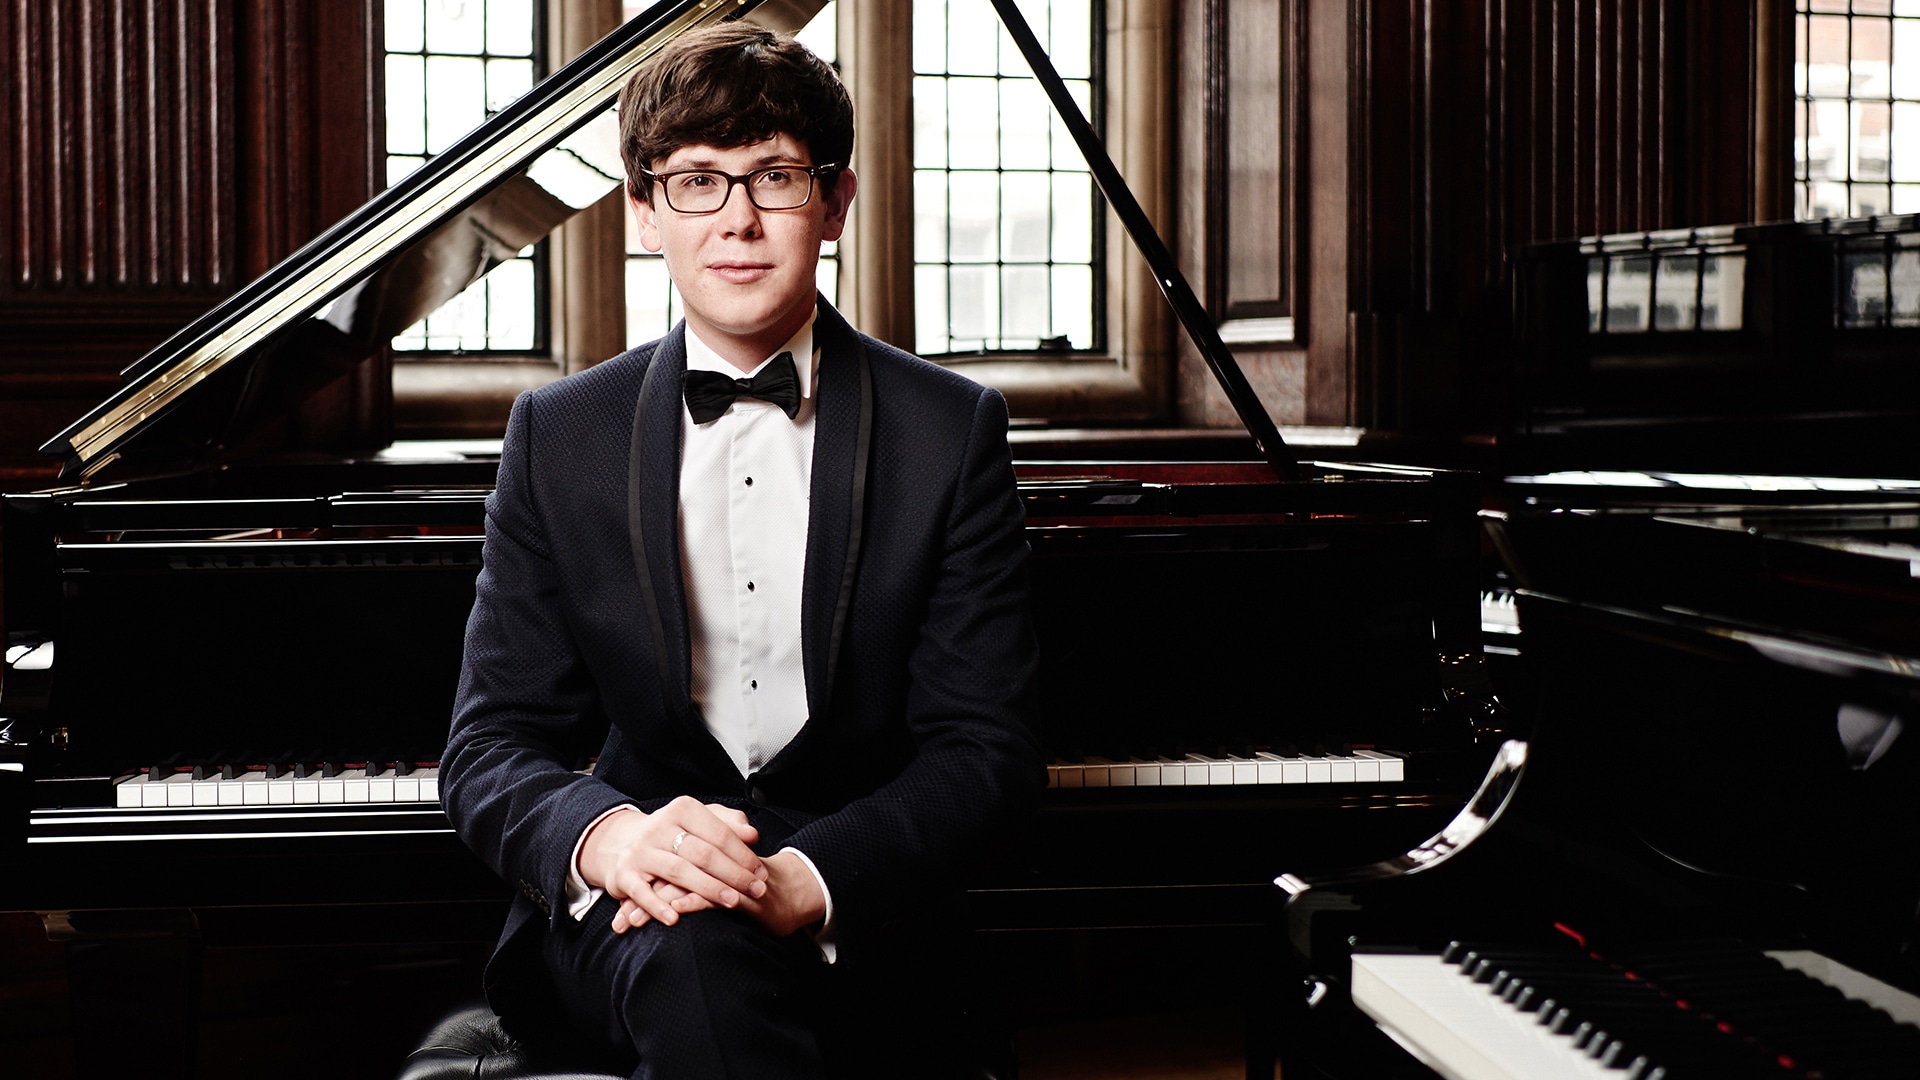 Martin James Bartlett wearing a suit and bow tie, sat on a piano stool in front of a grand piano. Martin wears glasses and has short, wavy brown hair.